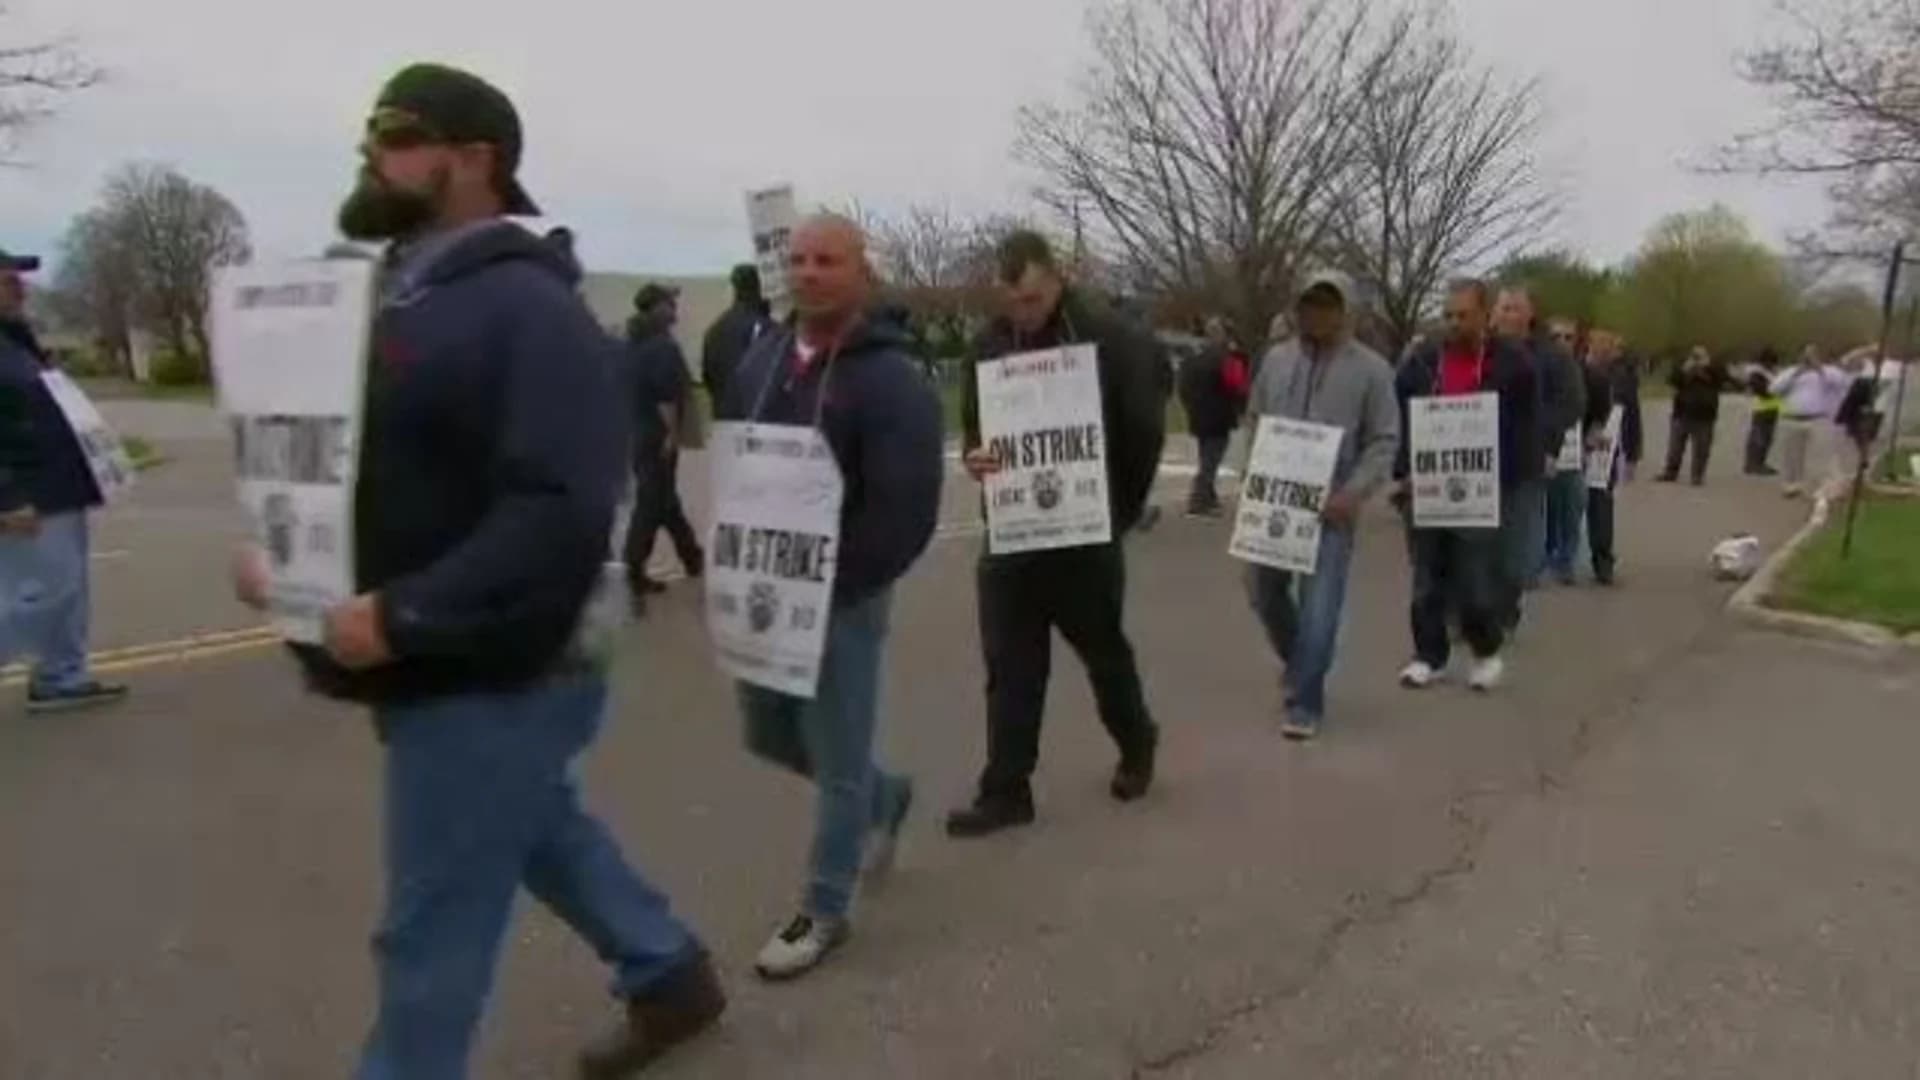 Beer distributor workers strike after rejecting pay cut